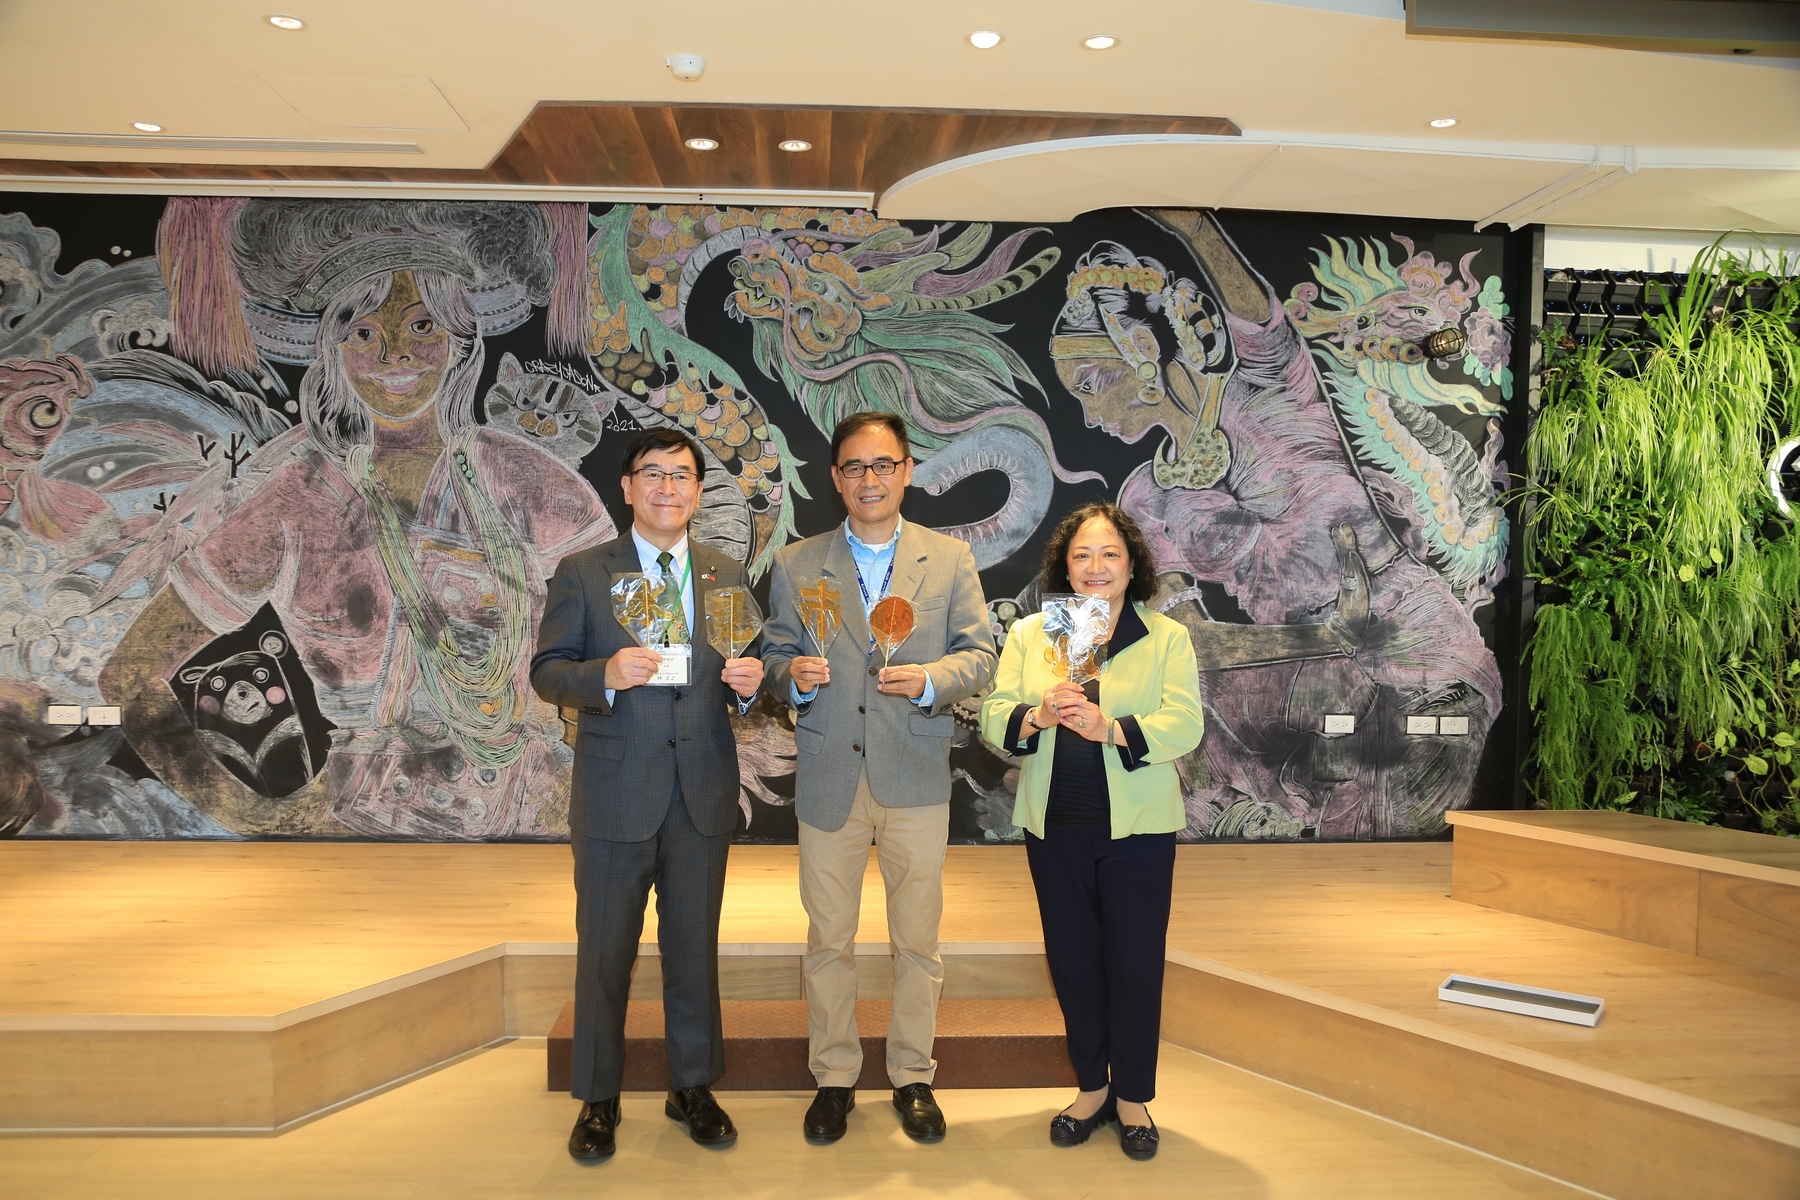 NSYSU presented "sugar painting." From the left to the right are: the mayor of Himi City Masayuki Hayashi, Dean Hong-Zen Wang, and Associate Dean Virginia Shen of NSYSU Si Wan College